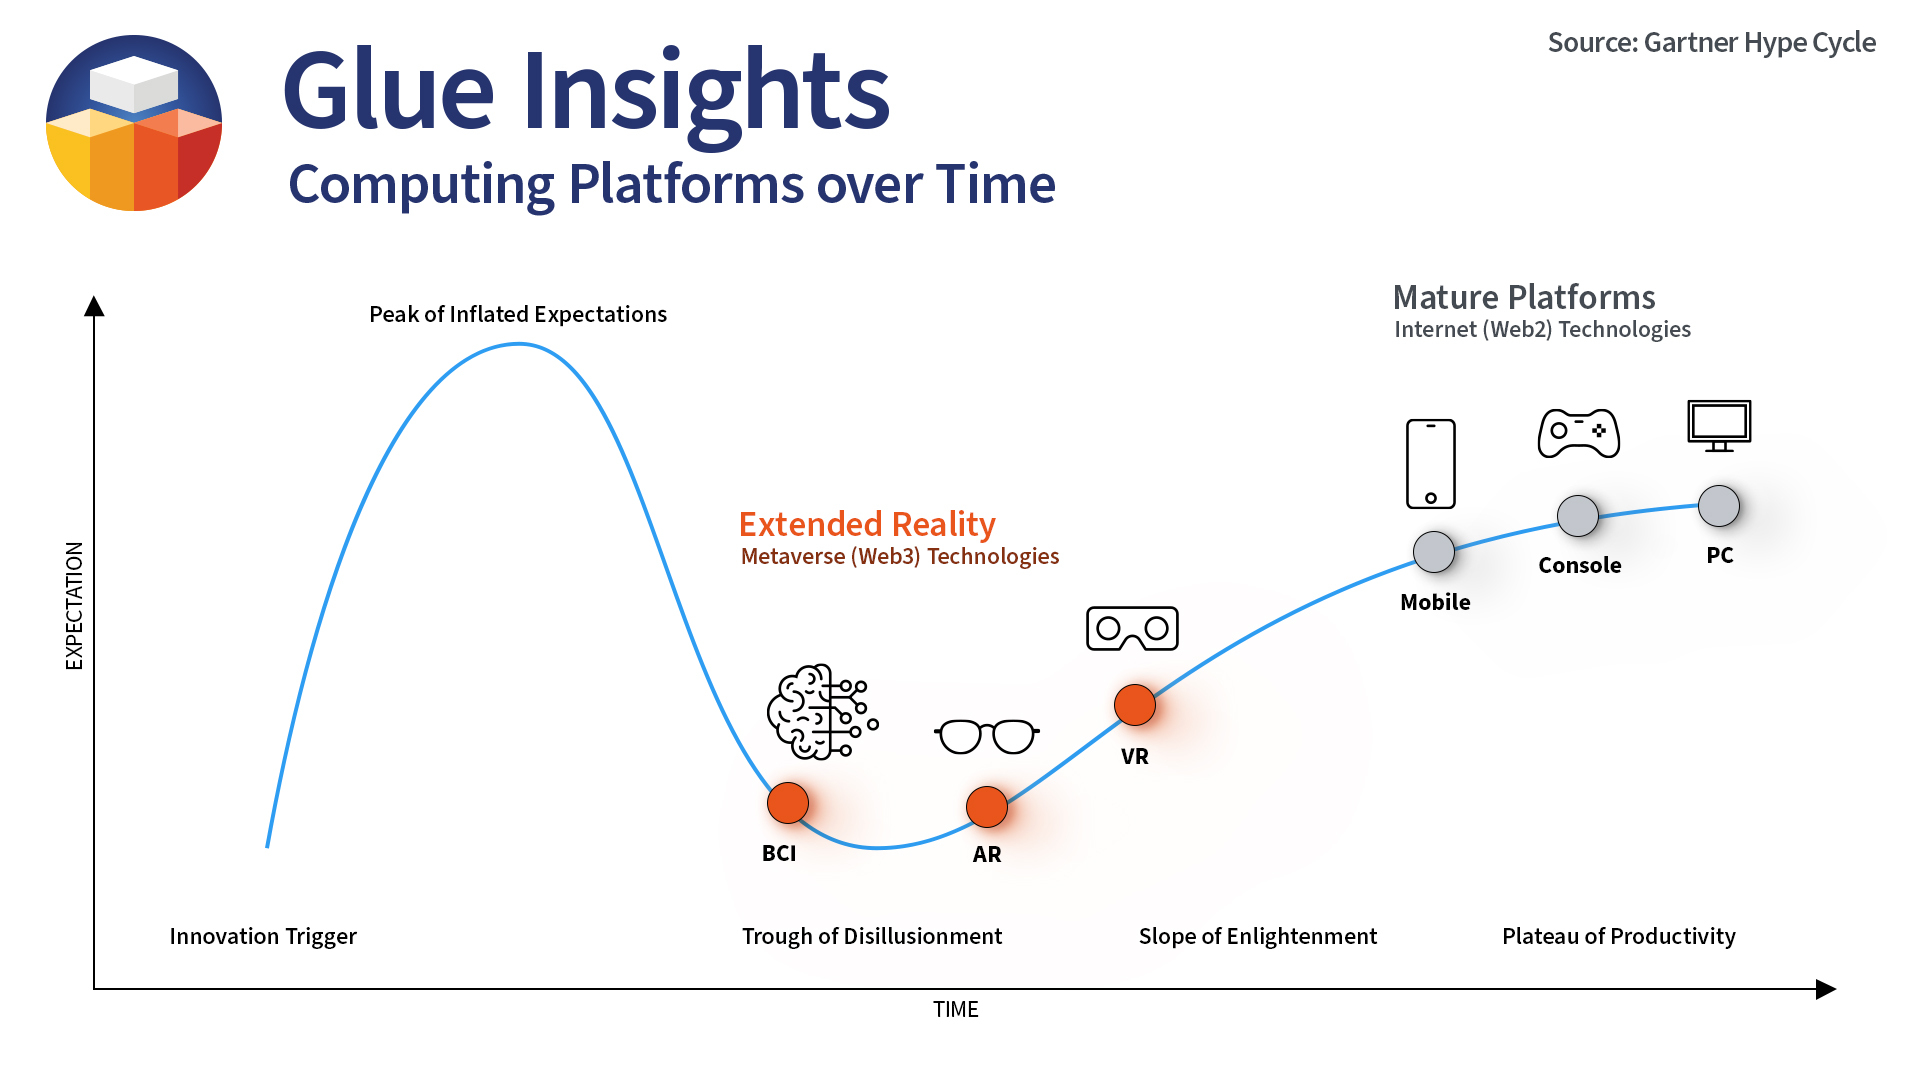 Gartner Hype Cycle of different metaverse technologies